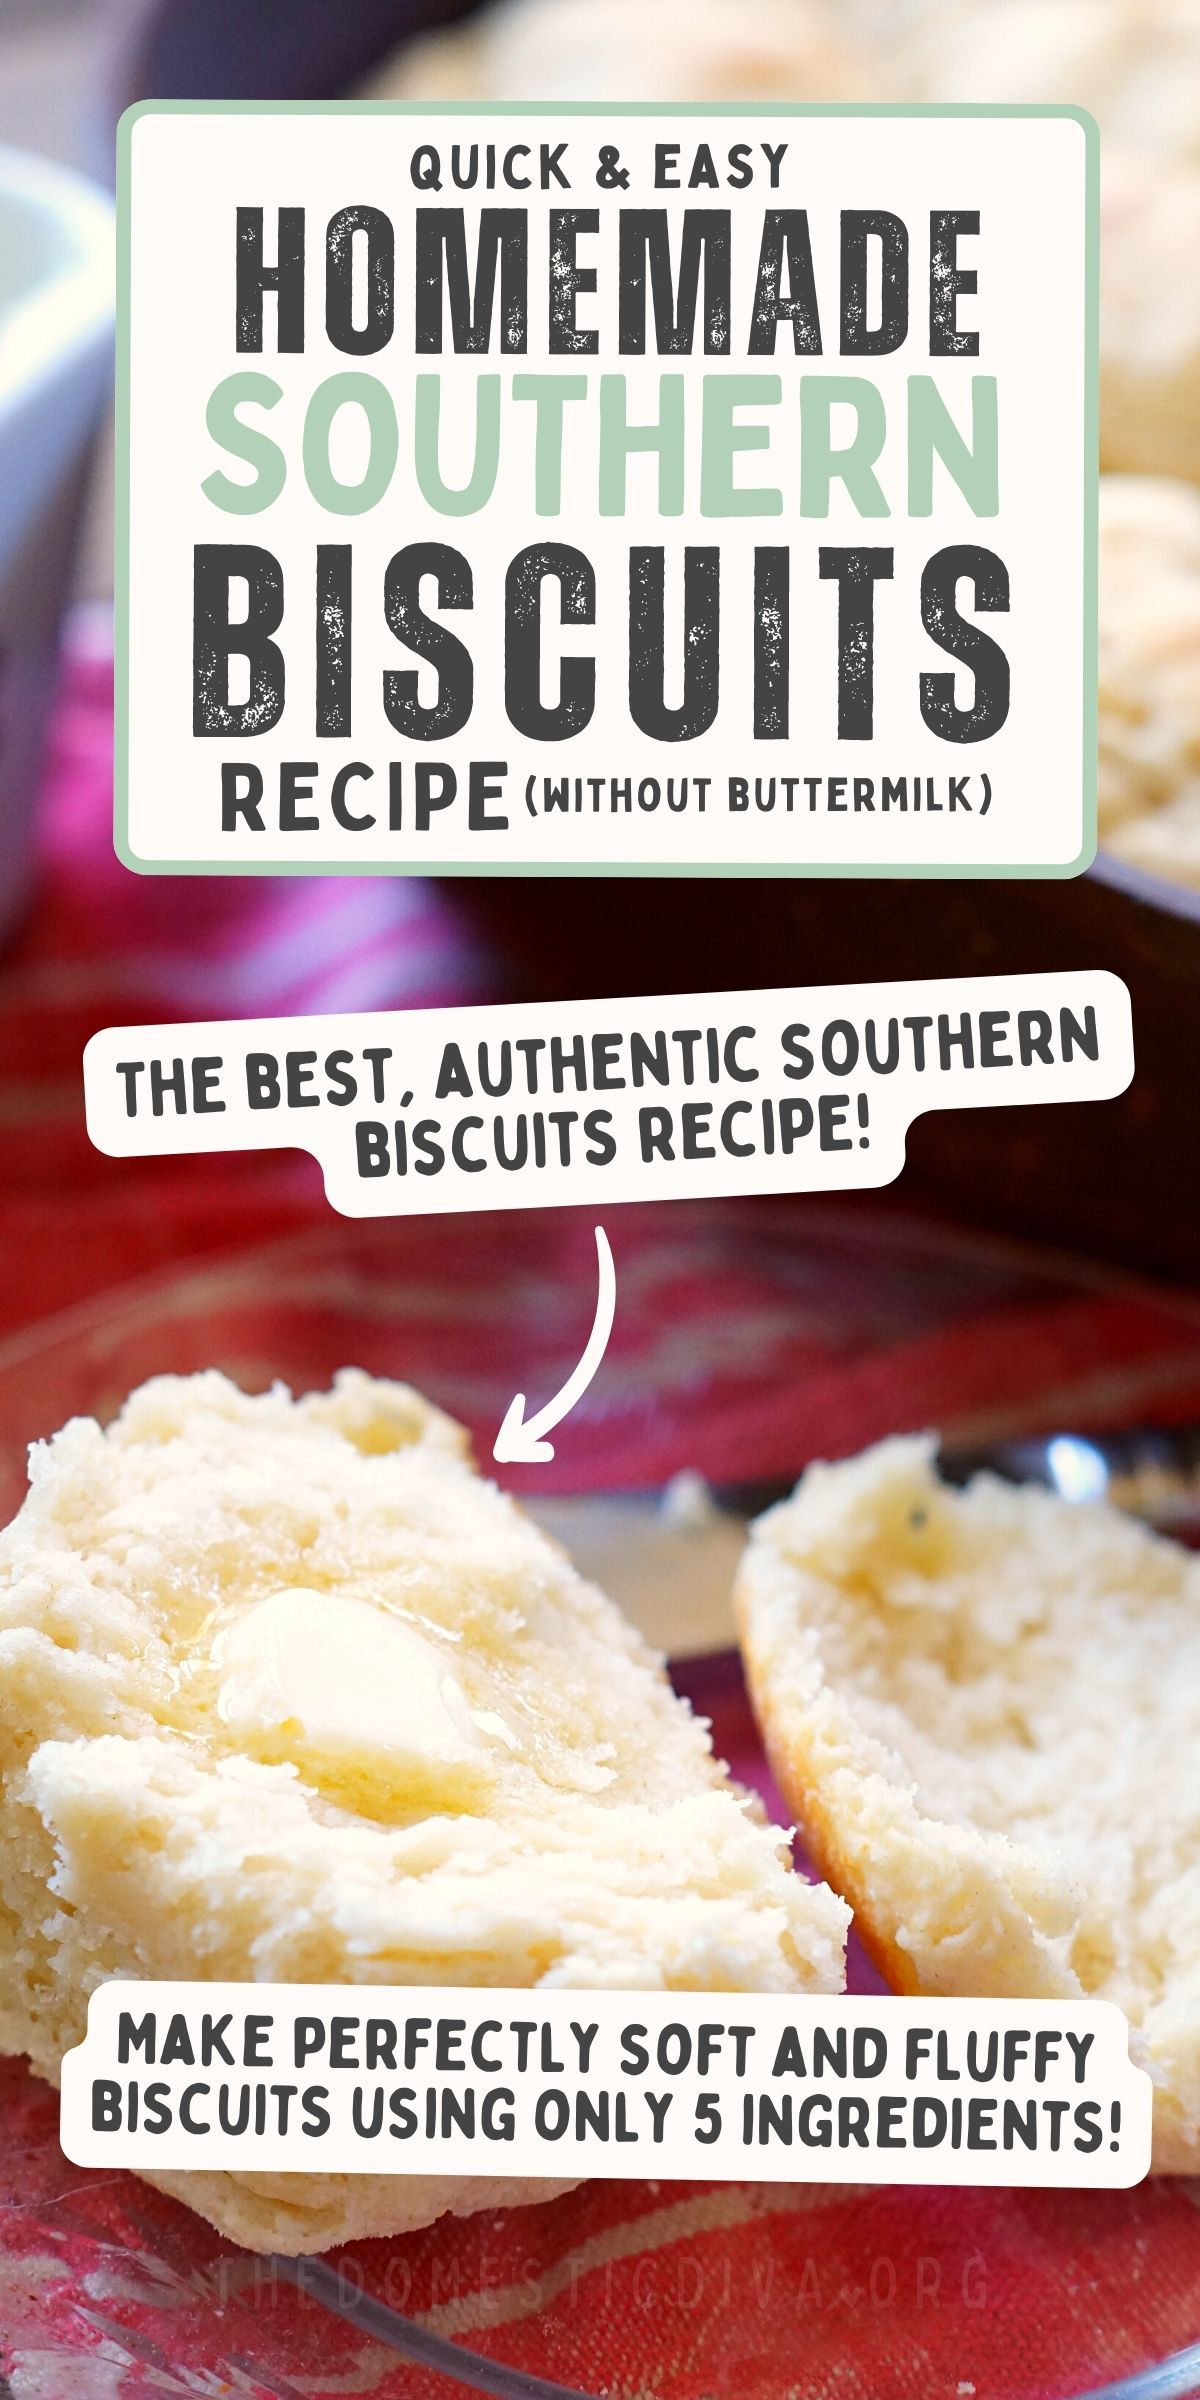 Homemade Southern Biscuits Recipe without Buttermilk